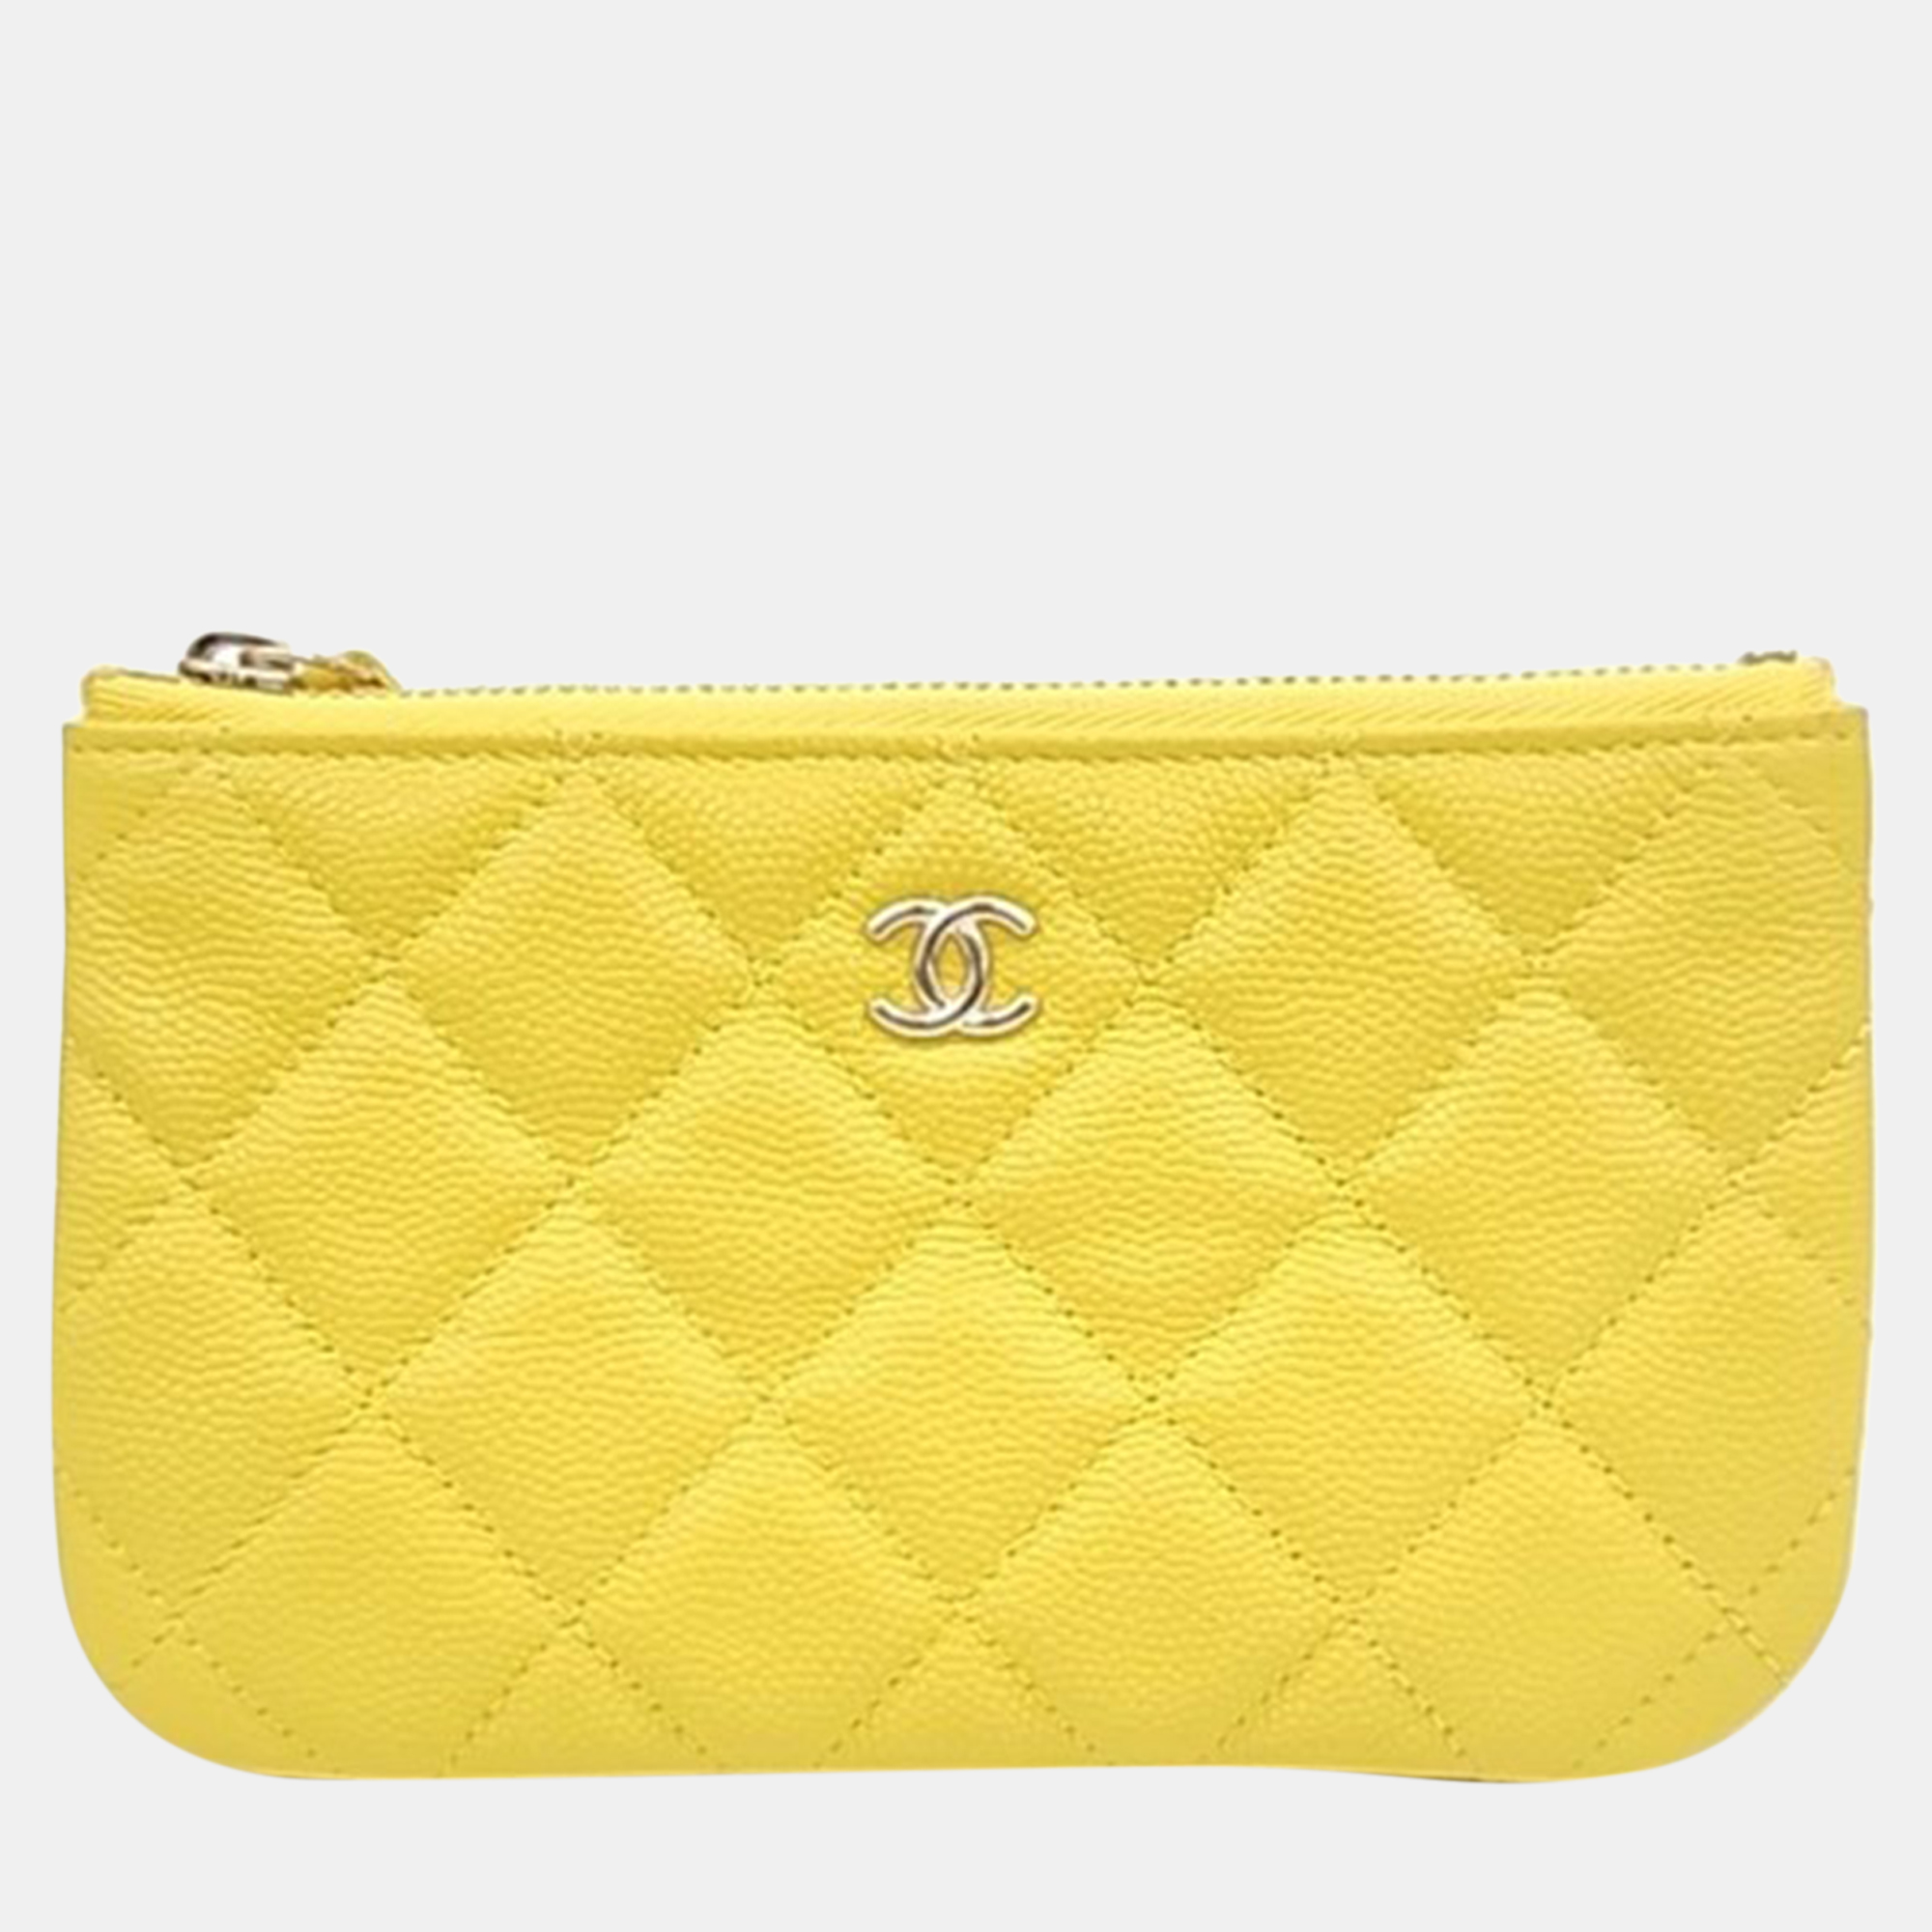 Chanel yellow caviar leather mini pouch